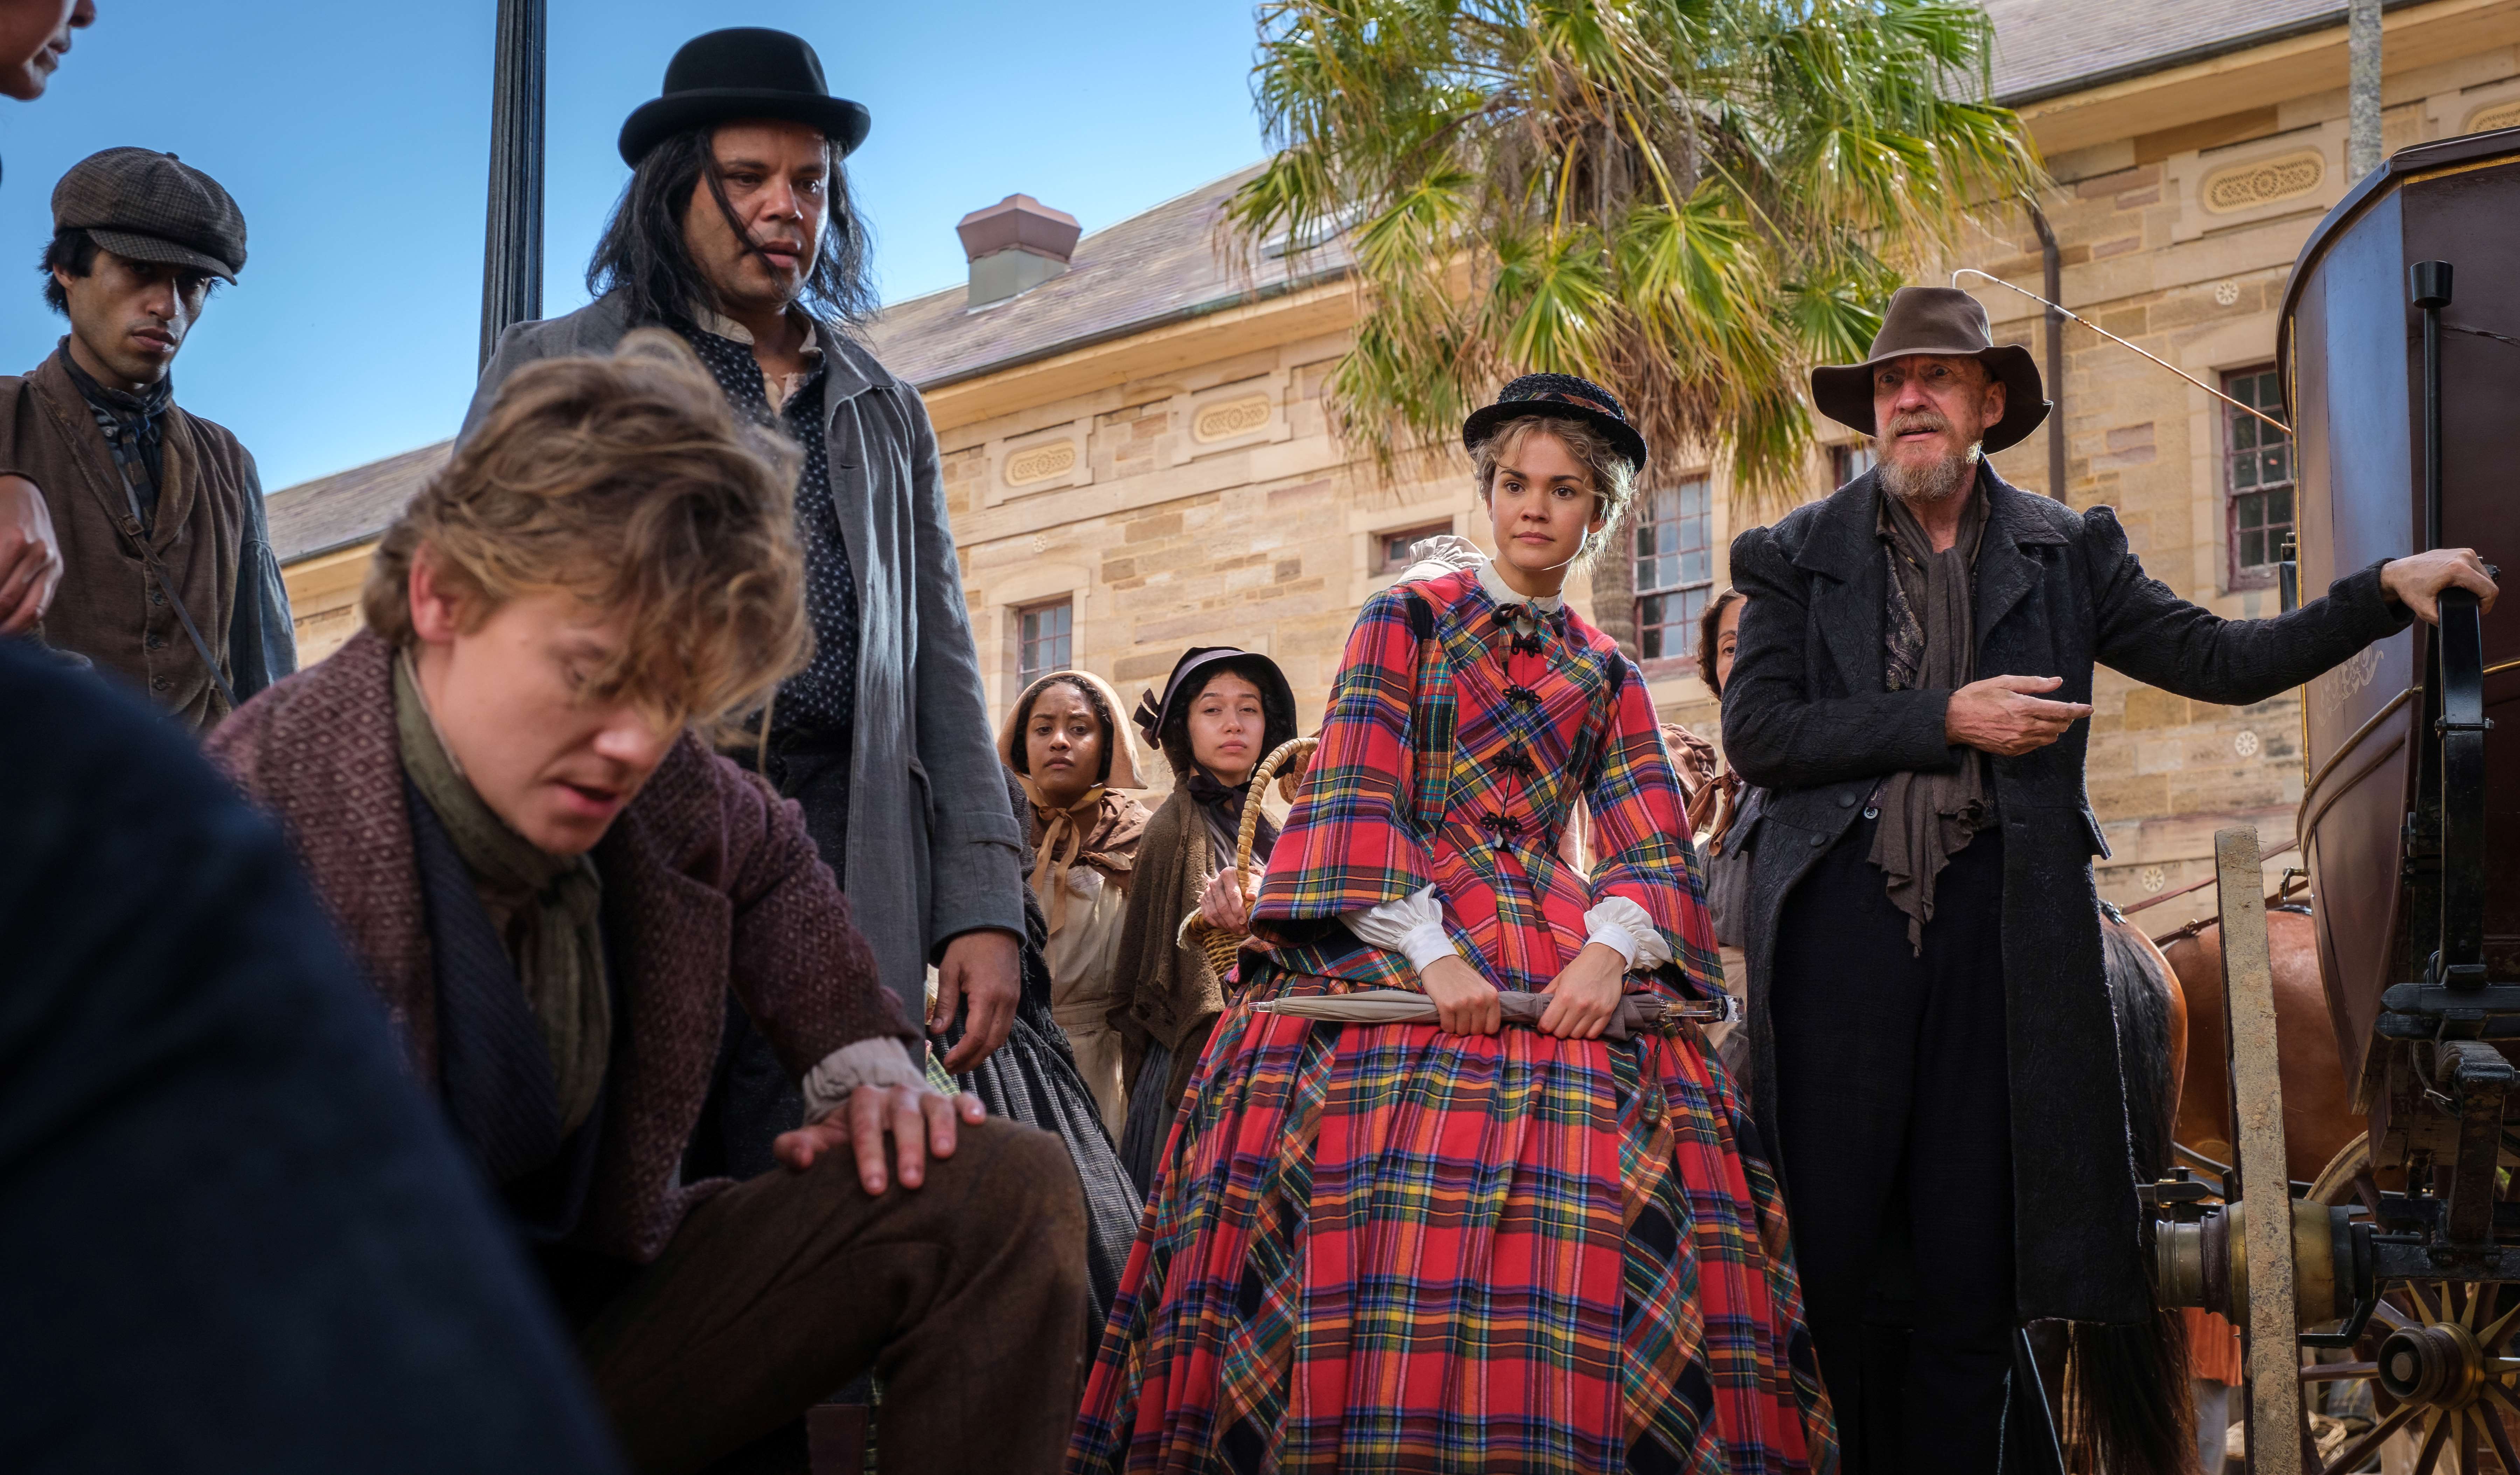 A still from The Artful Dodger, featuring Thomas Brodie-Sangster (left), Maia Mitchell (centre) and David Thewlis (right).